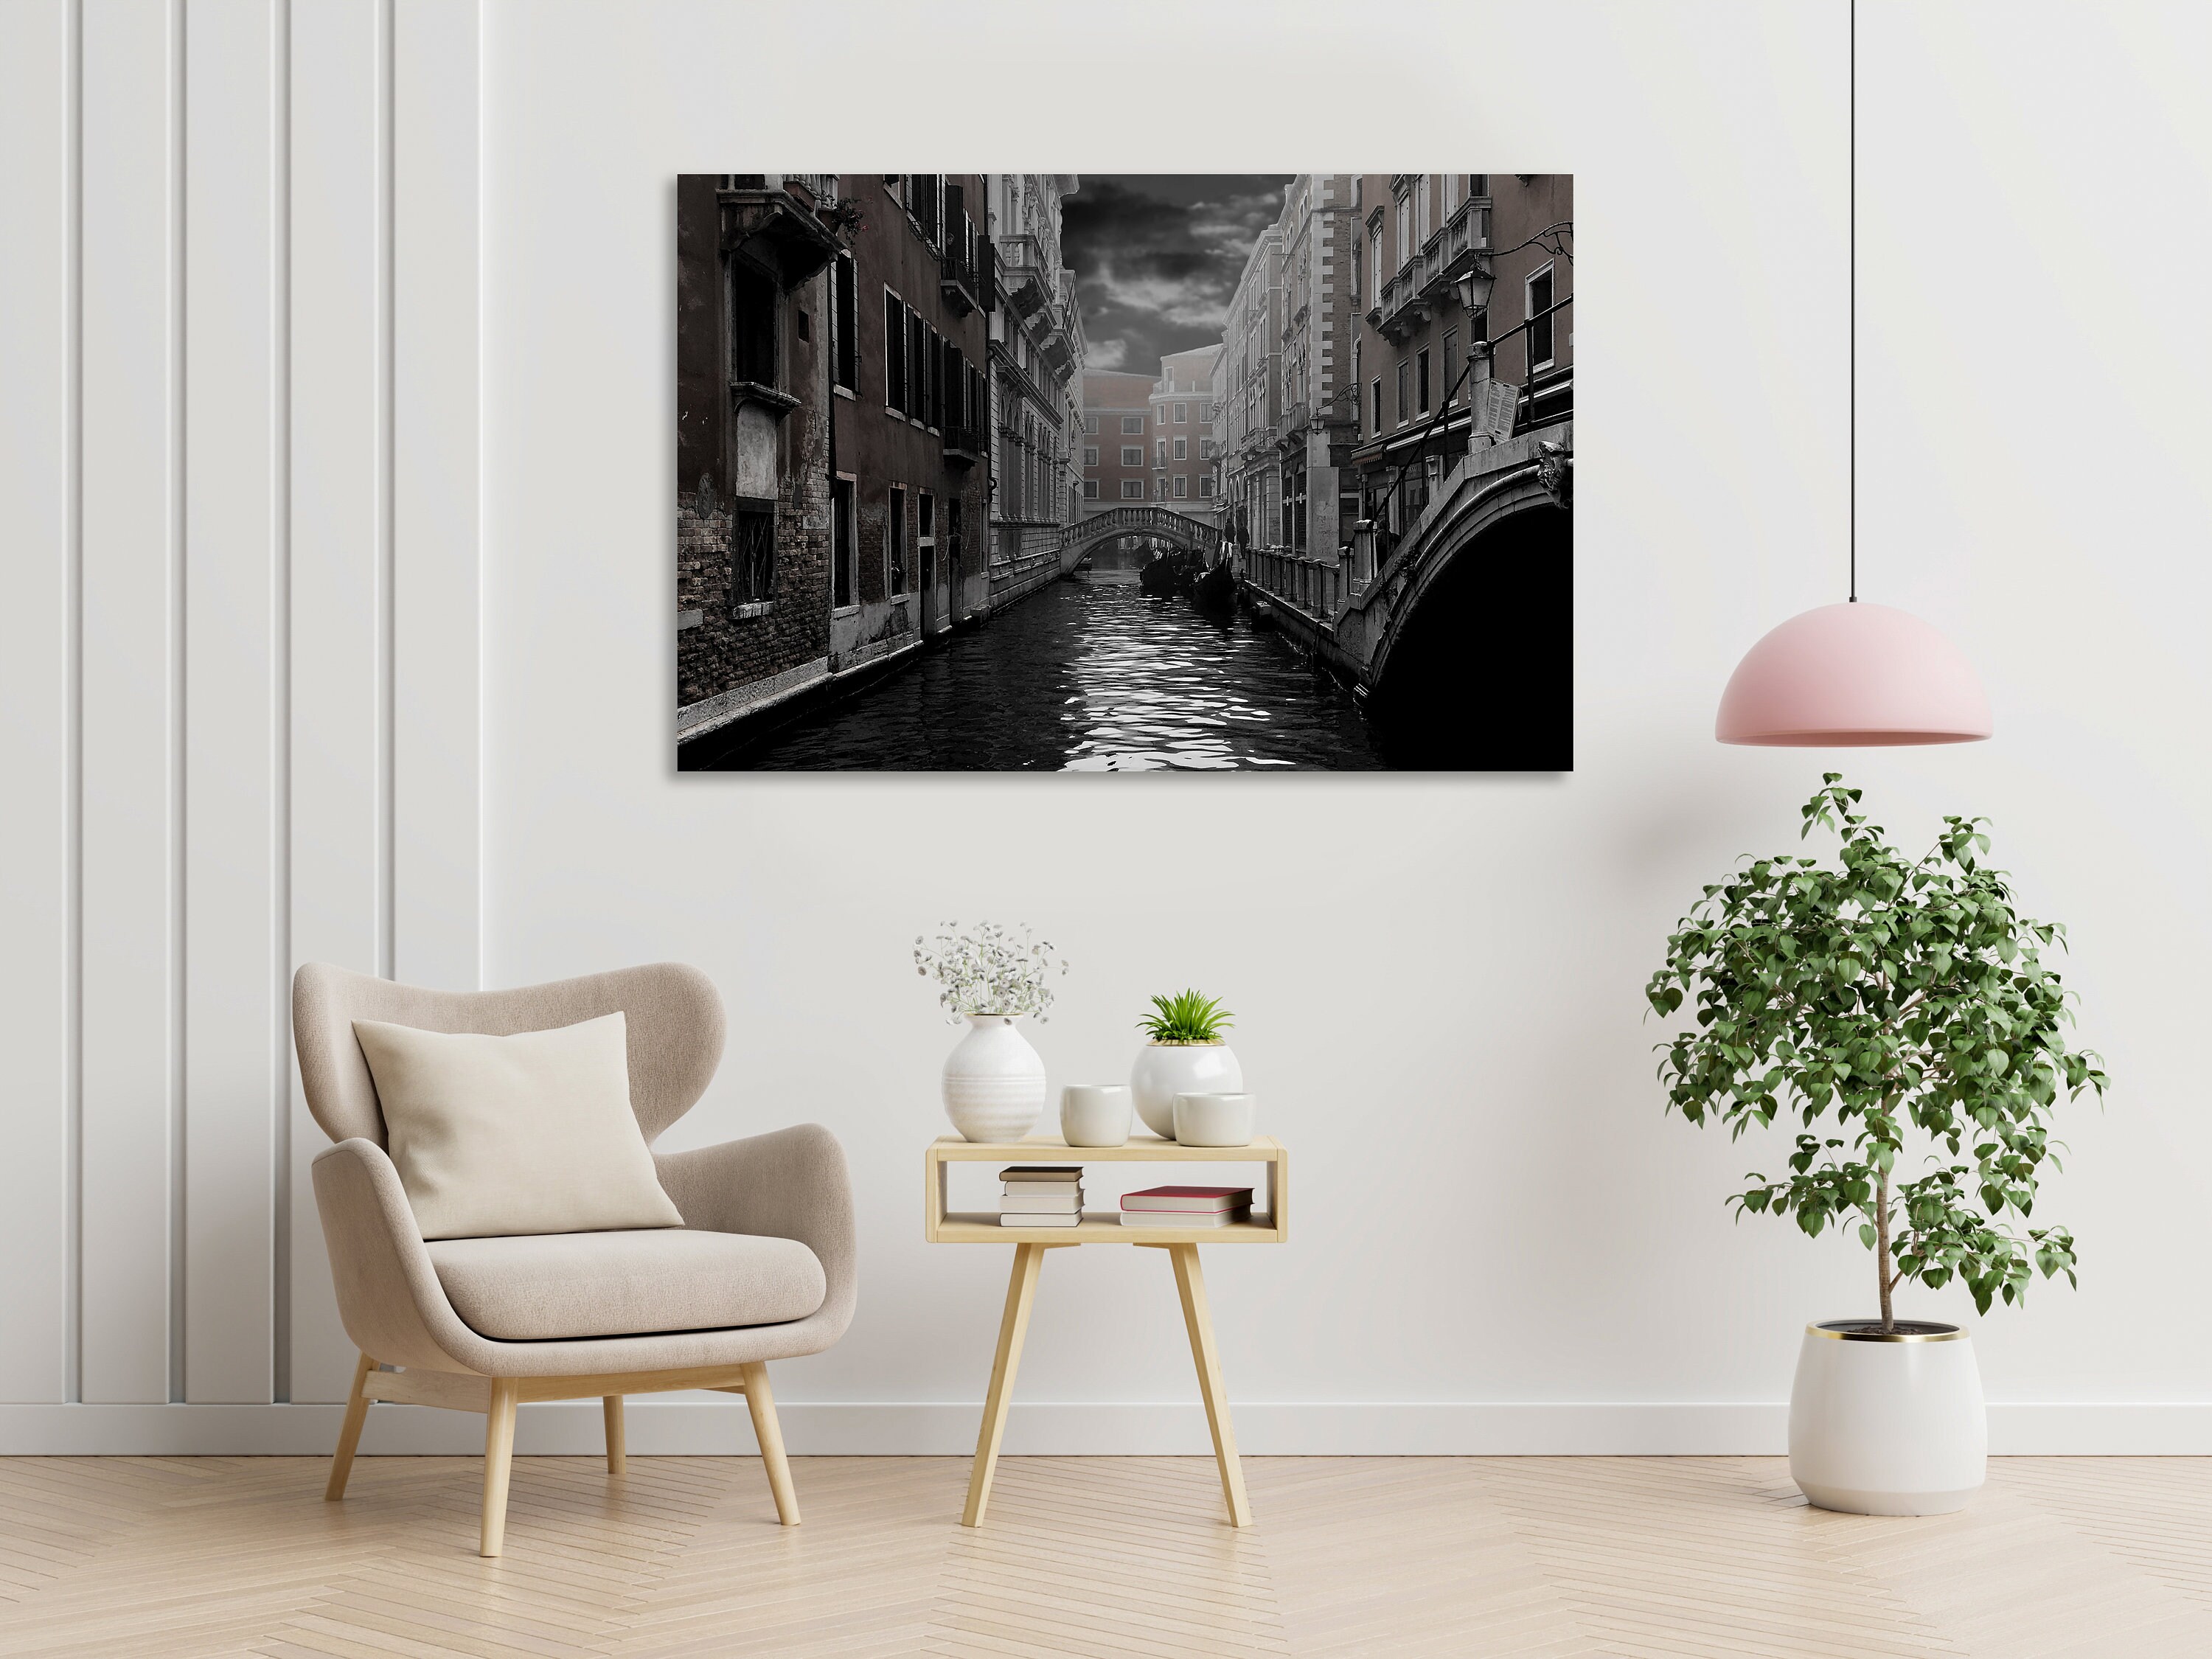 Decor Pictures and Painting. Digital Prints Downloadable Venice Wall Art Printable Landscape Venice Pictures City and Nature Photos